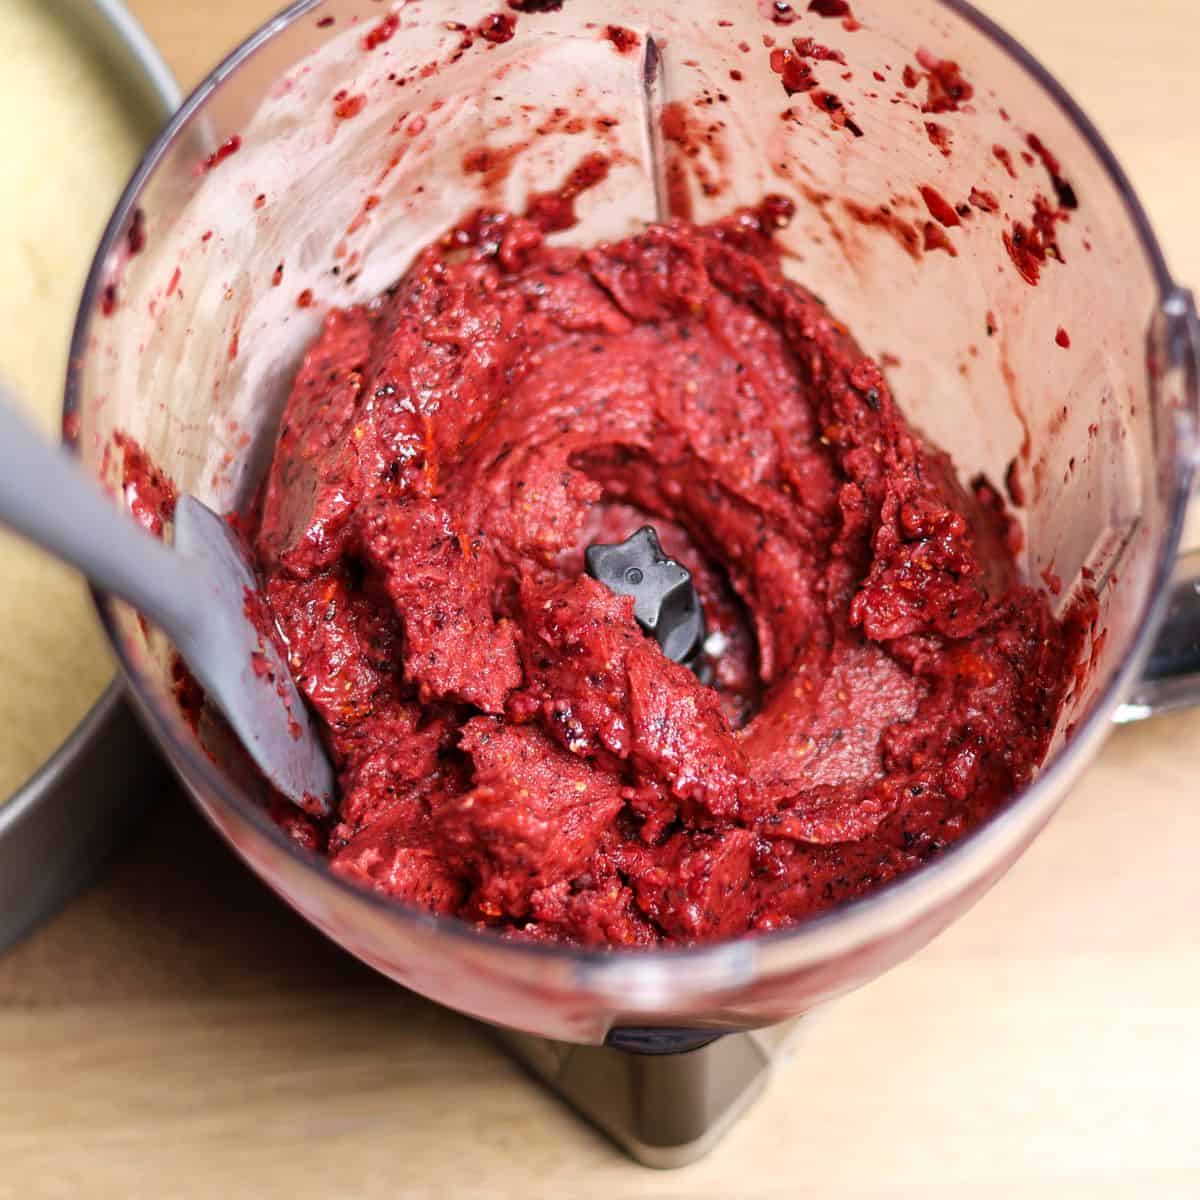 A blender filled with a rich, deep red berry mixture for a no-bake cheesecake topping, showing a swirled texture.